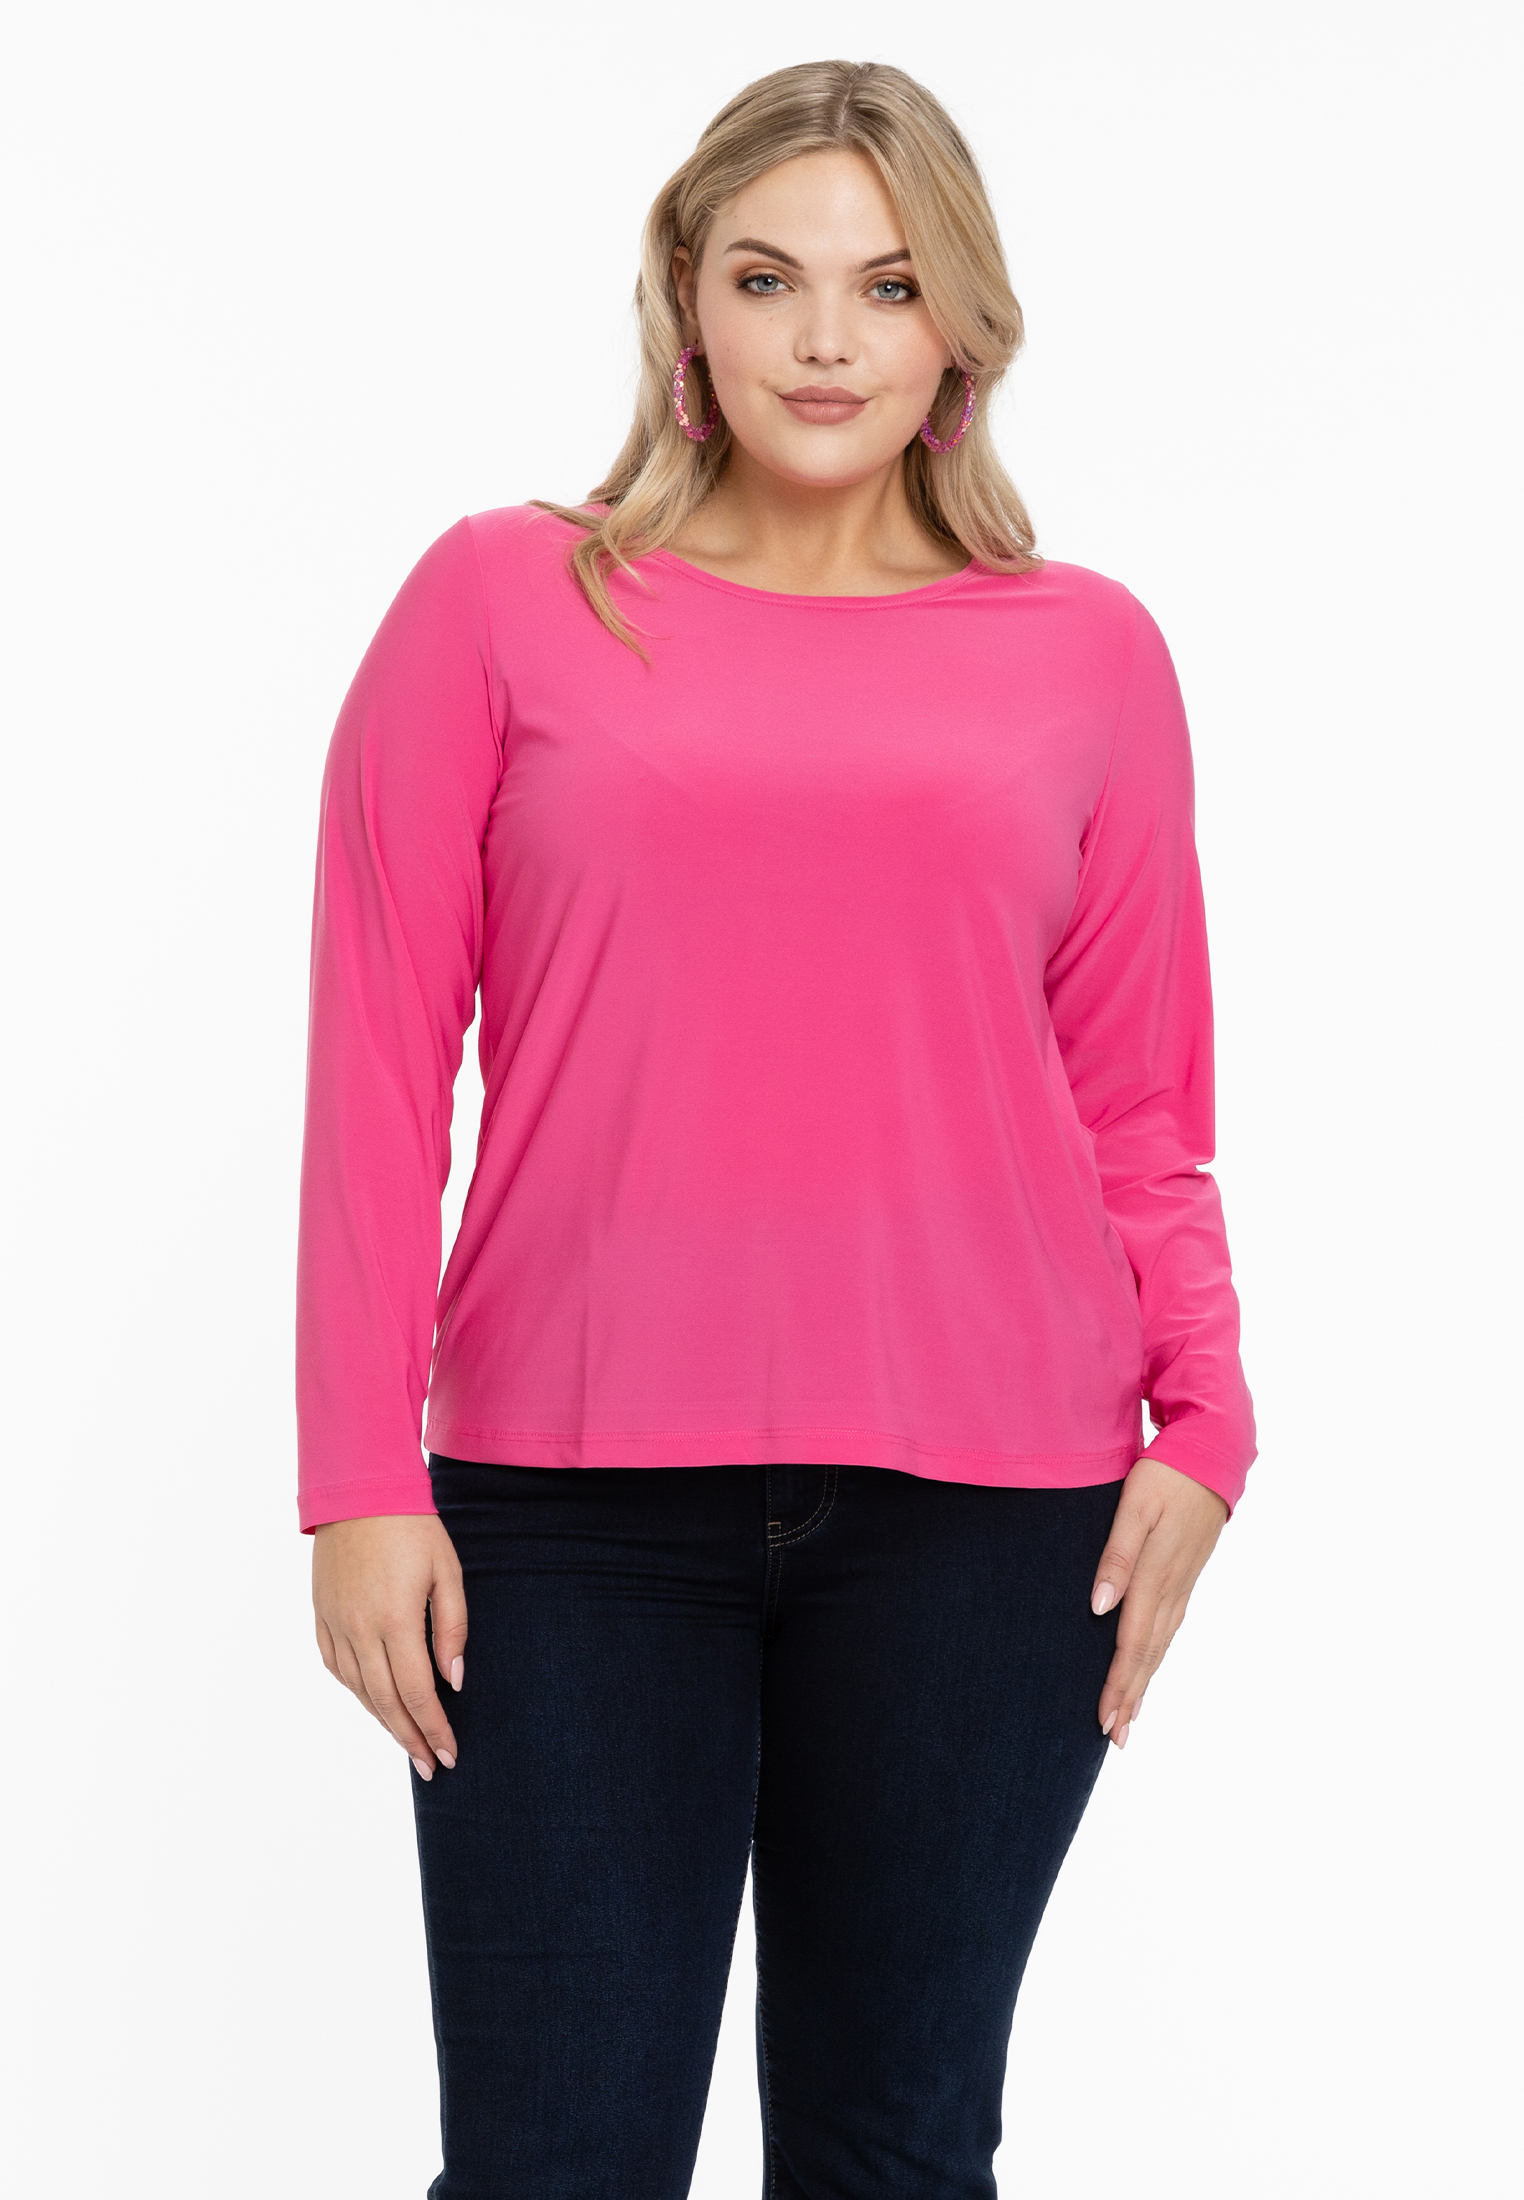 Shirt long sleeve DOLCE 42/44 pink